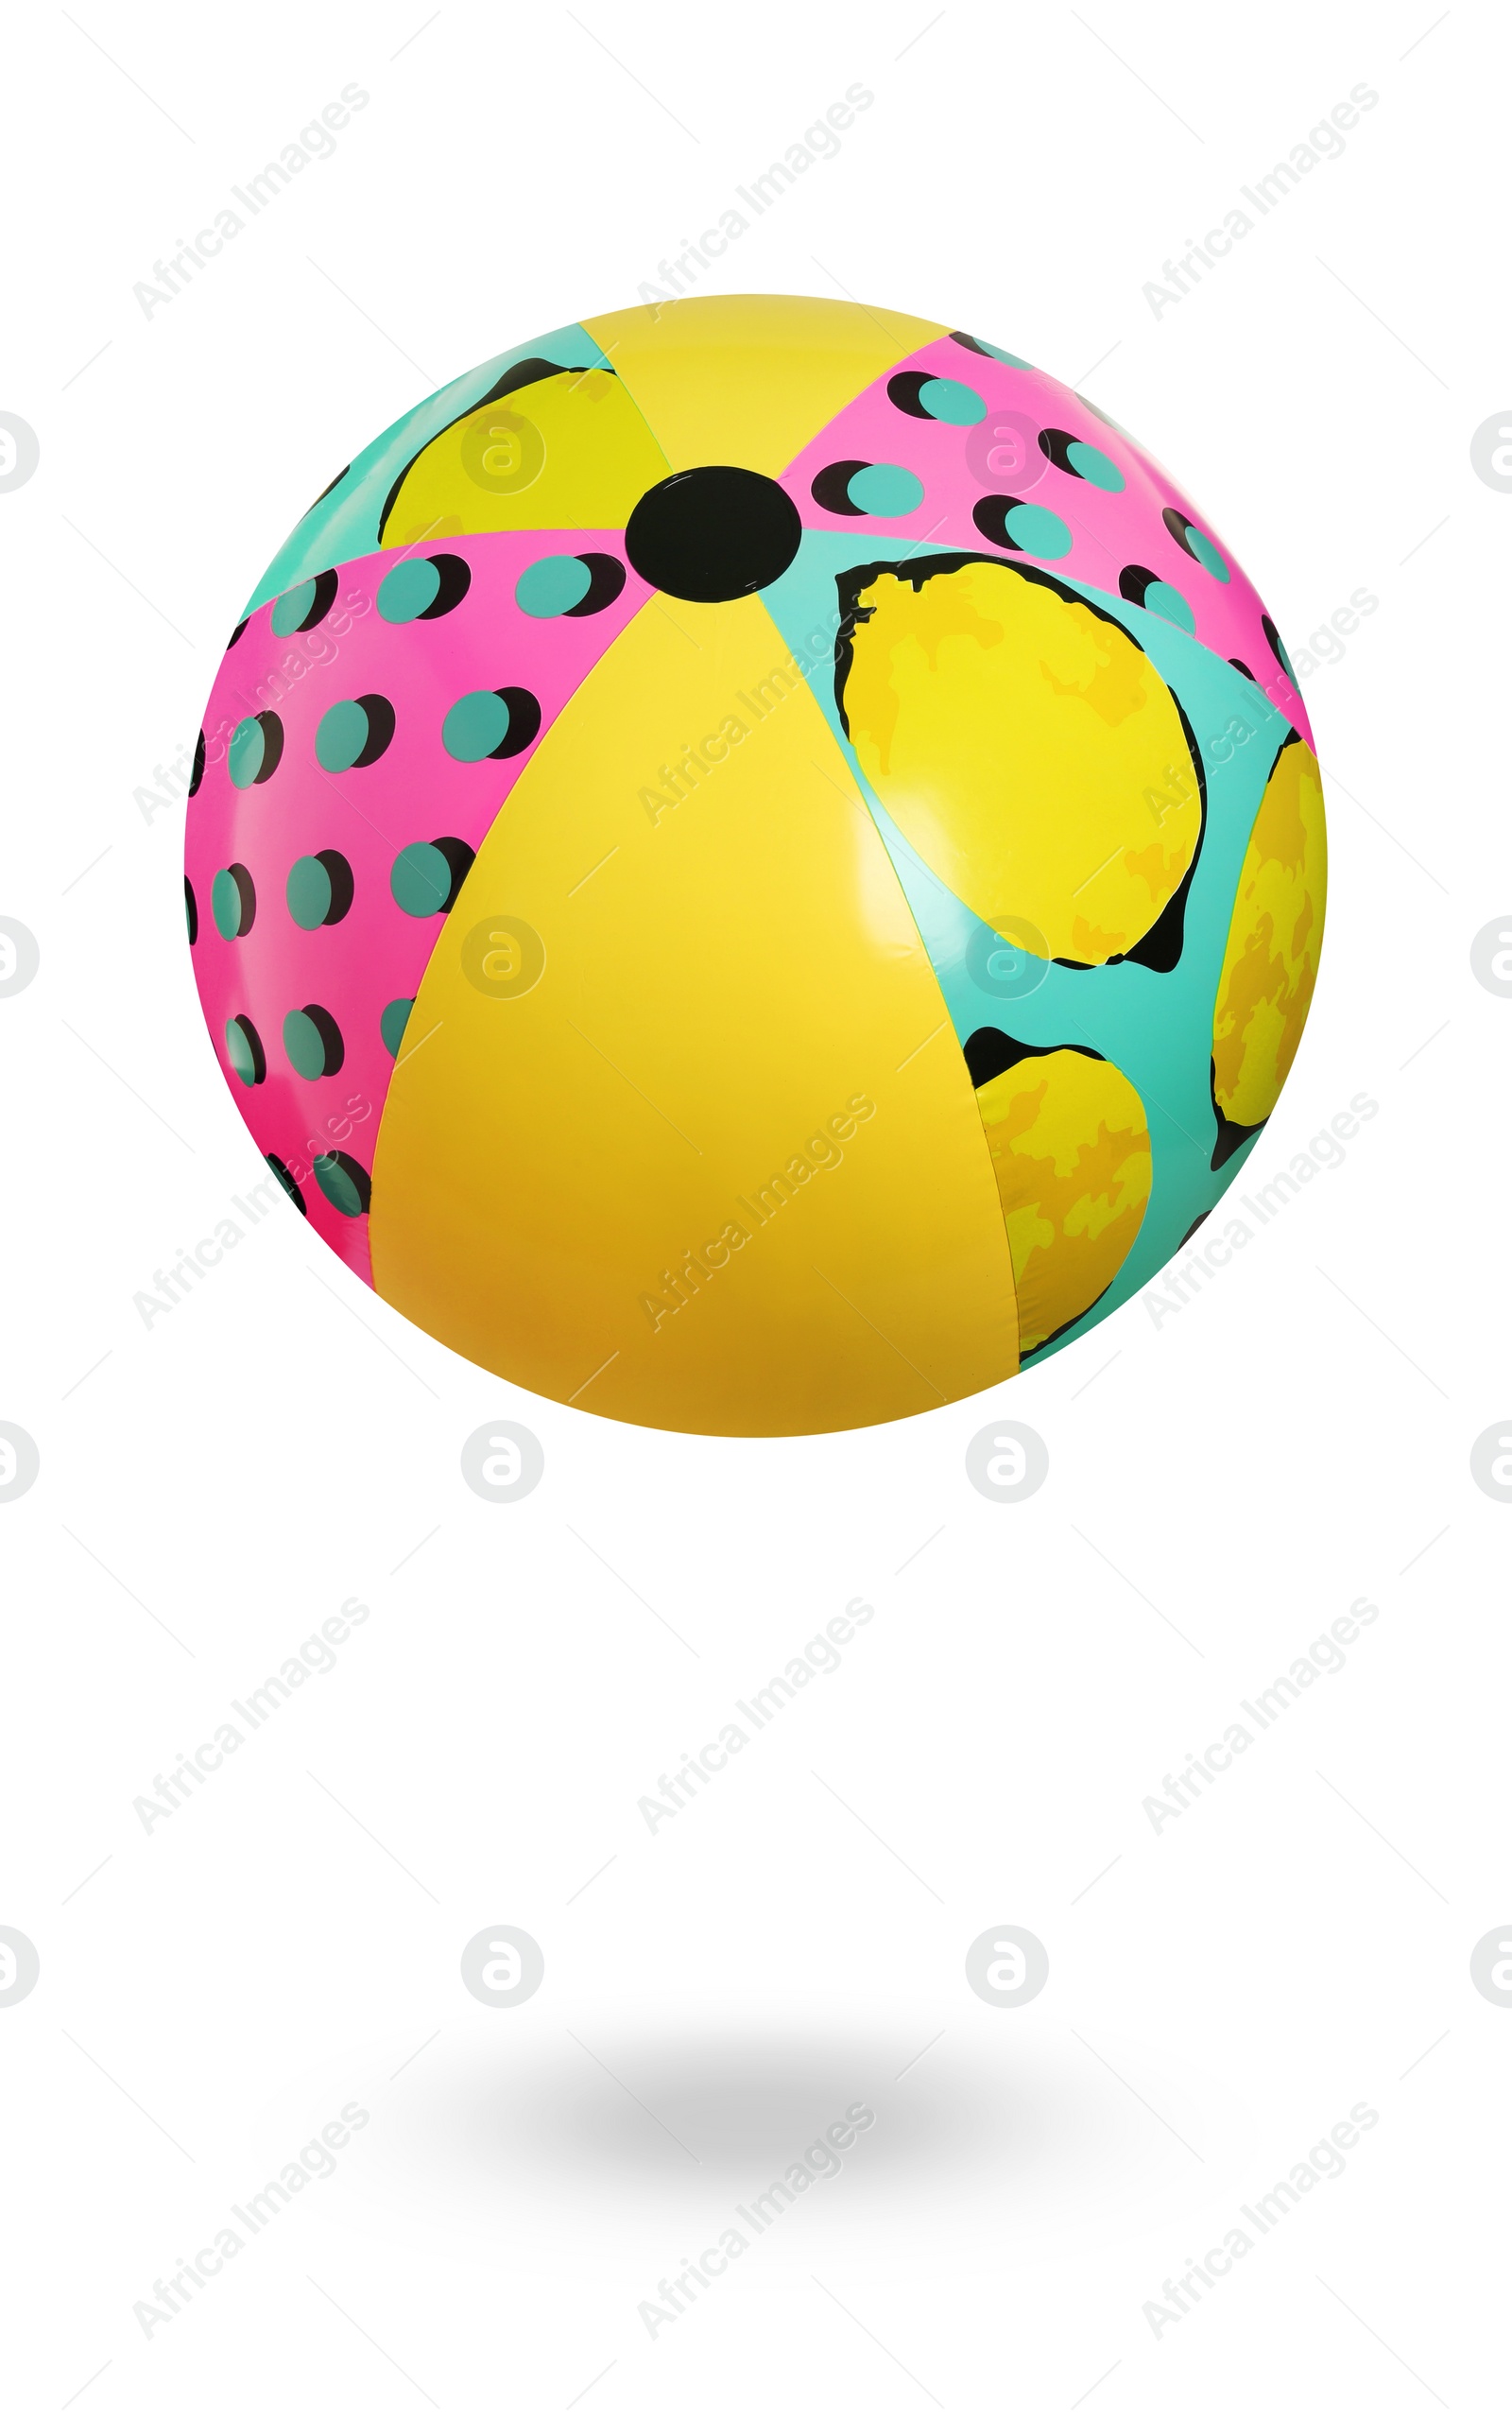 Image of Inflatable colorful beach ball on white background 